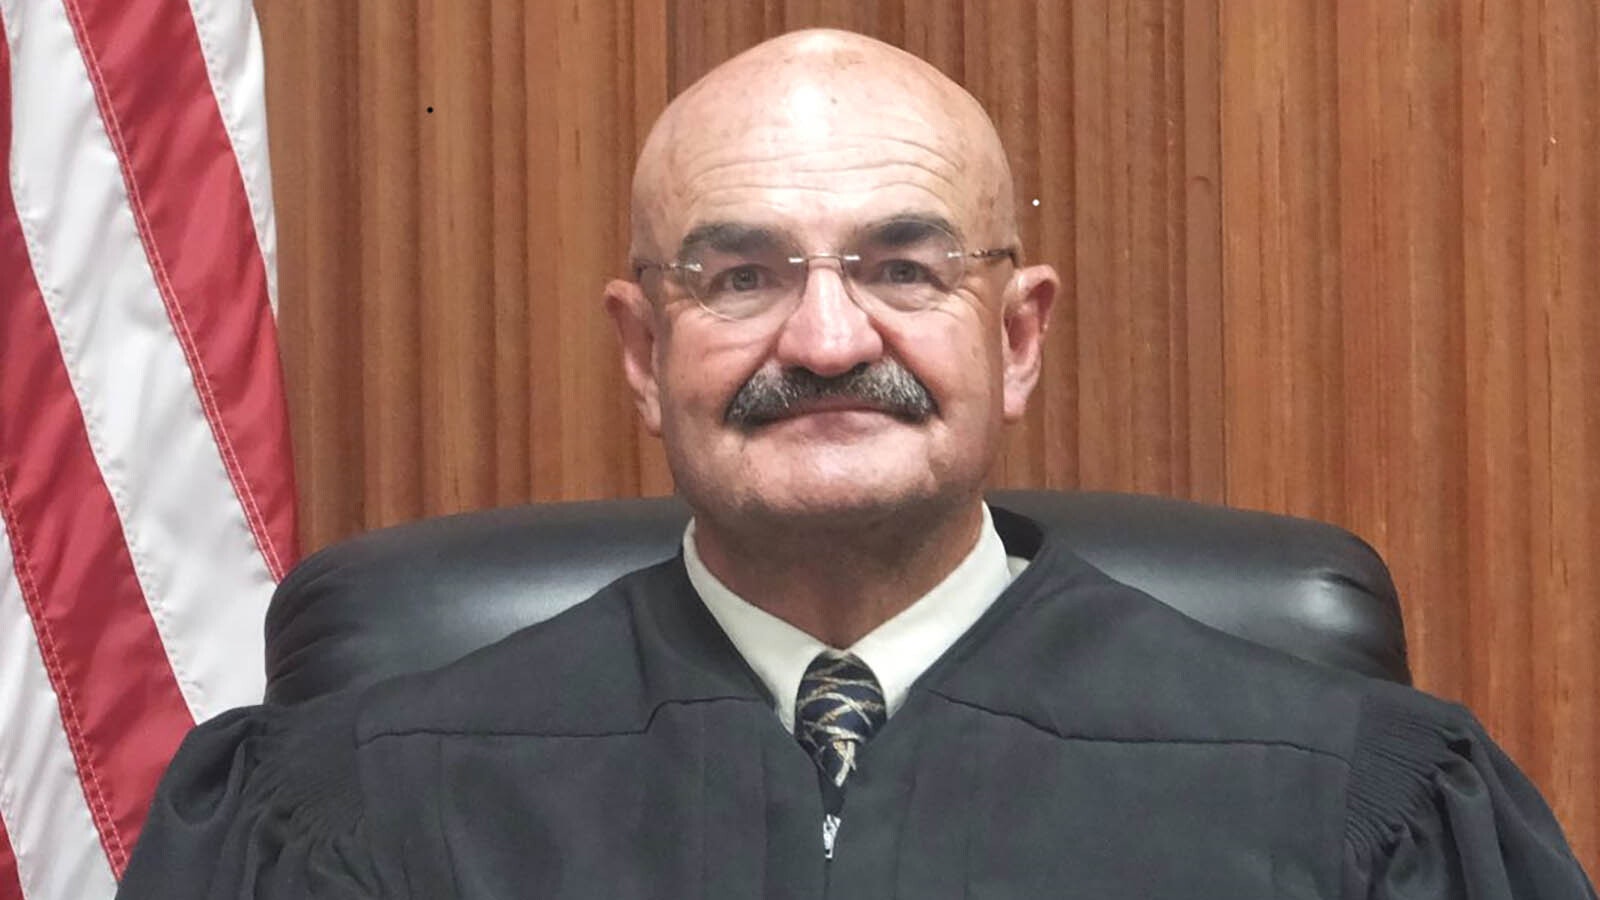 After a 46-year law career, Wyoming Supreme Court Justice Keith Kautz will retire in May when he turns 70.